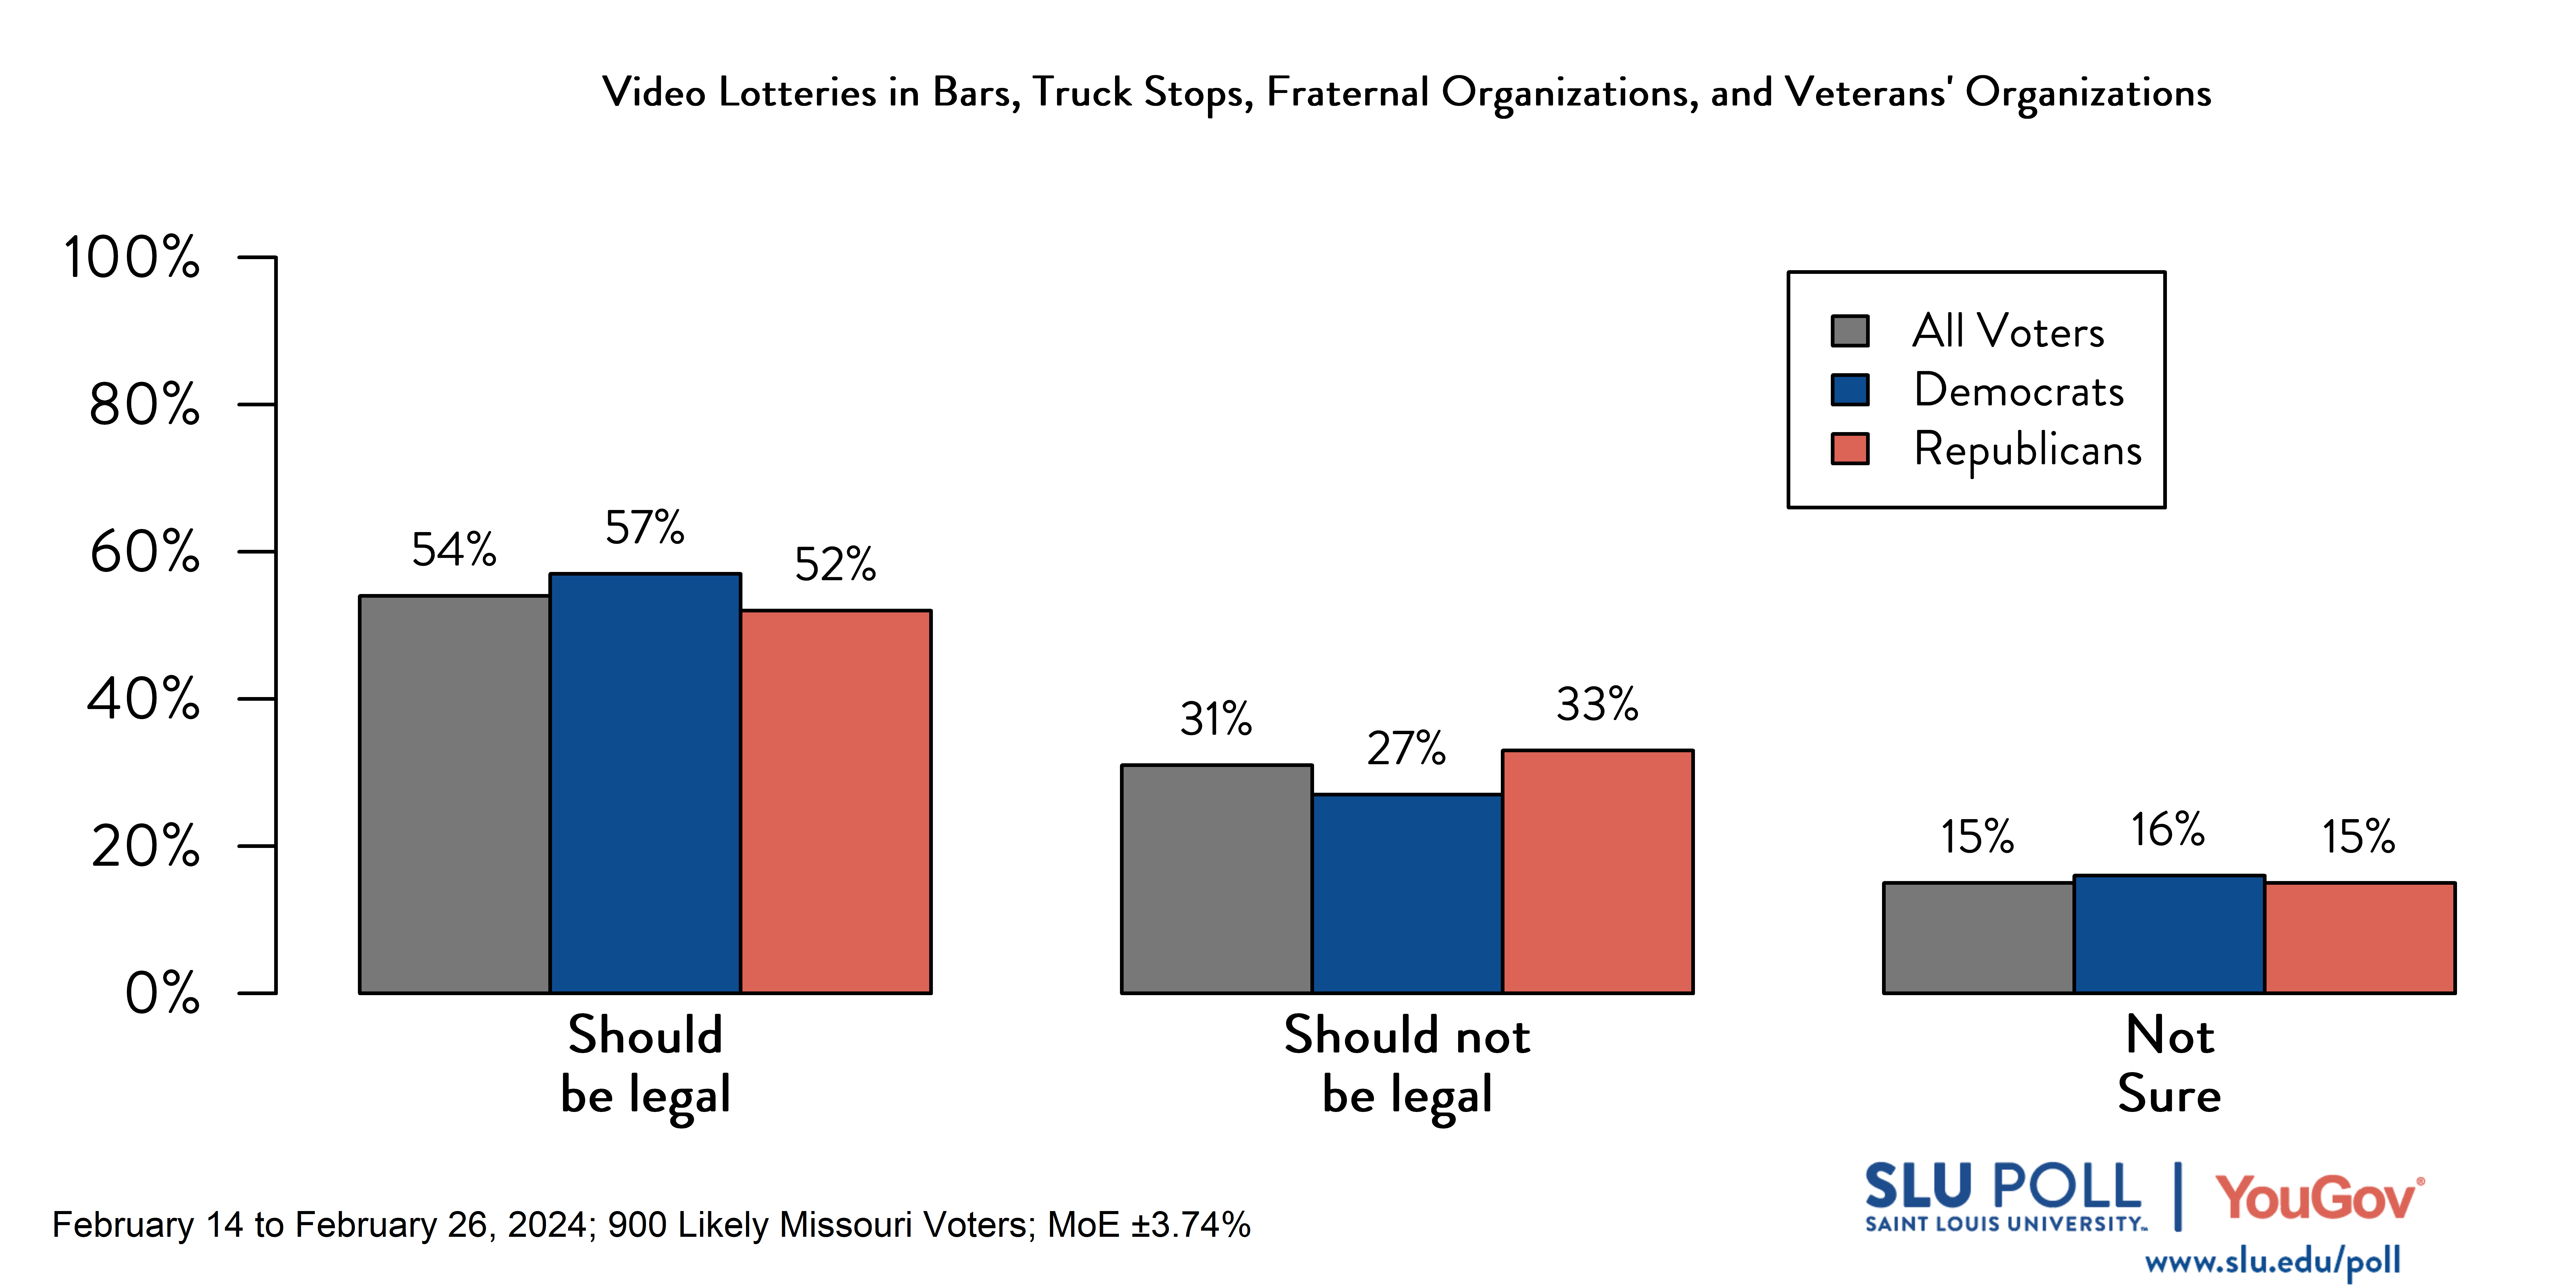 Likely voters' responses to 'Do you think the following should be legal in the state of Missouri for those who are 21 years old or older…Video lottery gaming machines in bars, truck stops, fraternal organizations, and veterans' organizations?': 54% Should be legal, 31% Should not be legal, and 15% Not Sure. Democratic voters' responses: ' 57% Should be legal, 27% Should not be legal, and 16% Not Sure. Republican voters' responses:  52% Should be legal, 33% Should not be legal, and 15% Not Sure.